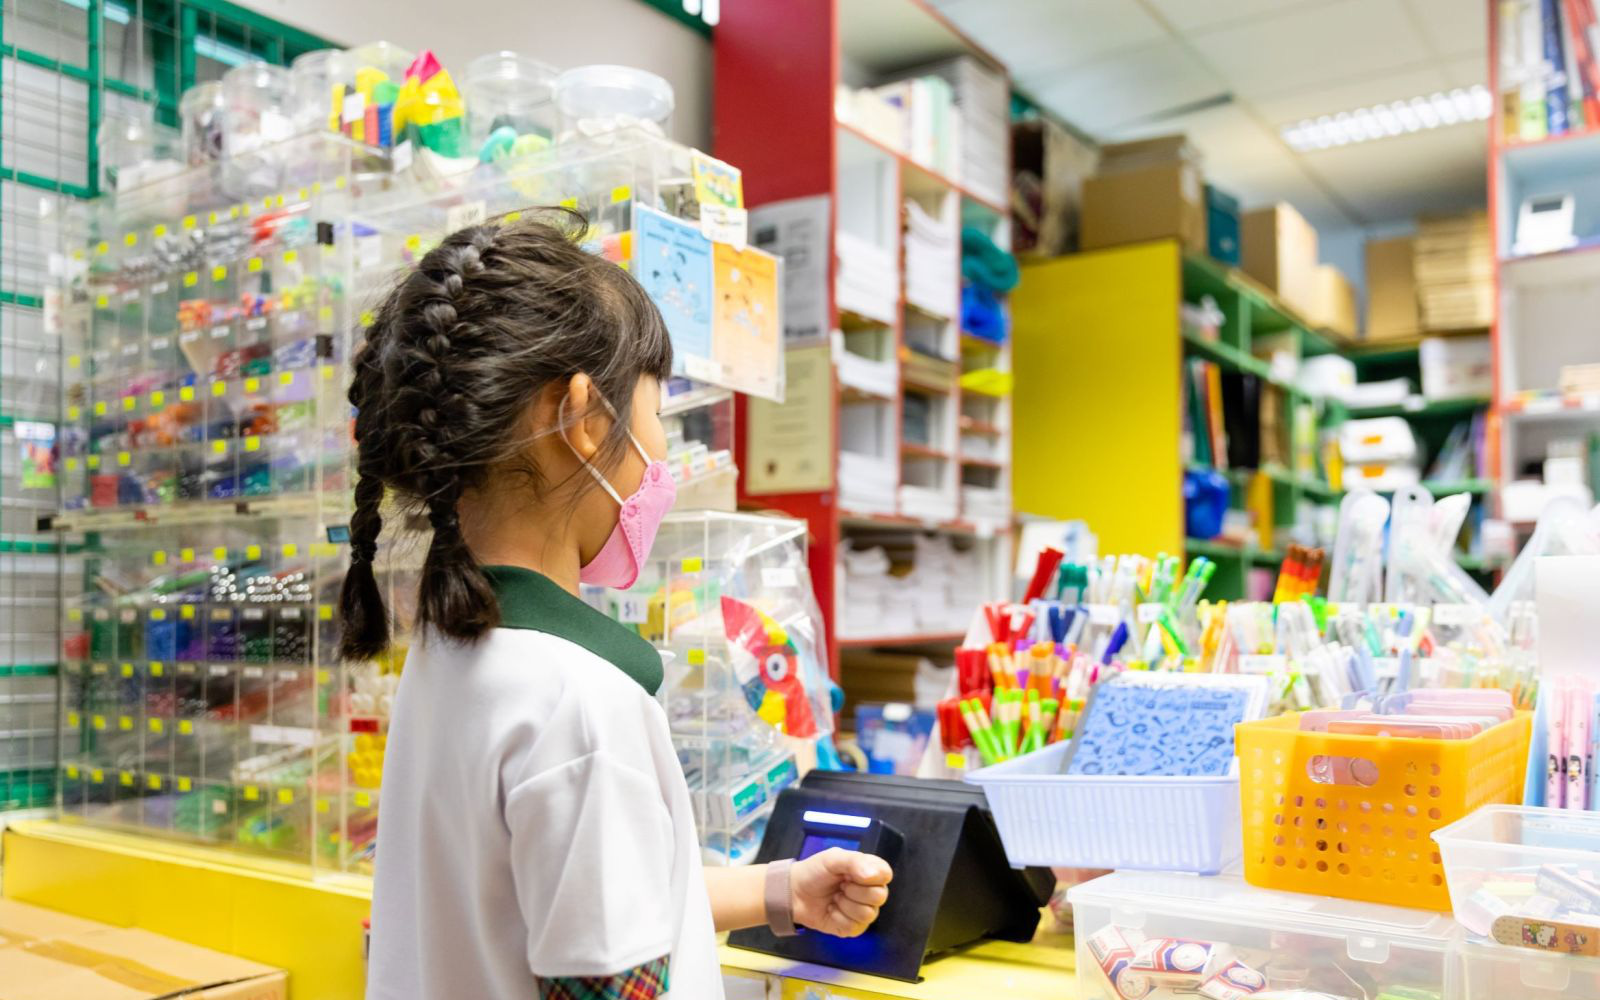 Singapore aims to expand access to digital payments in schools